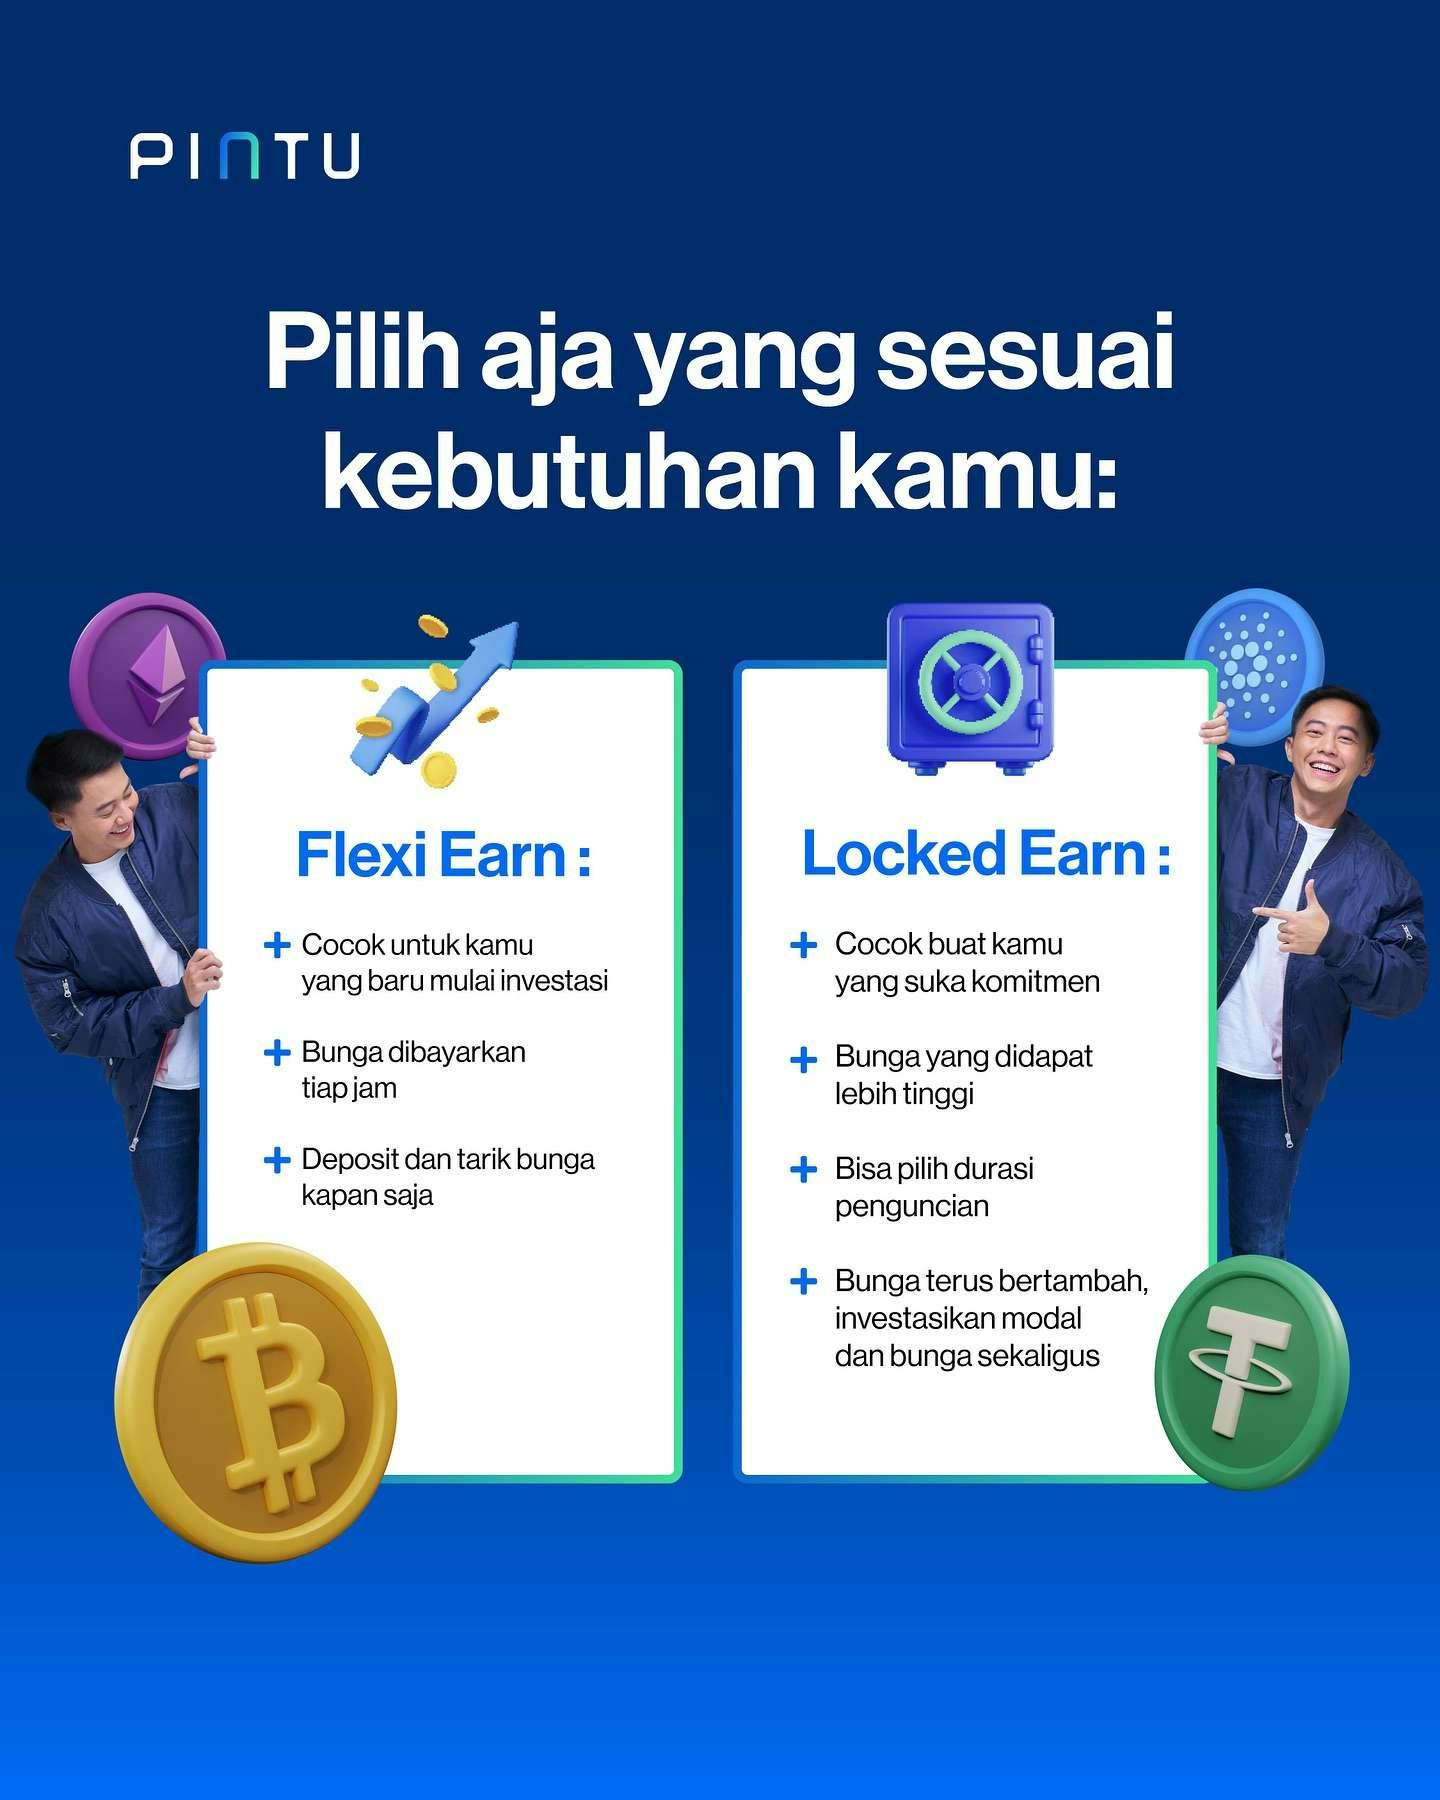 I am promoting Earn feature (uploaded from Pintu Instagram account)